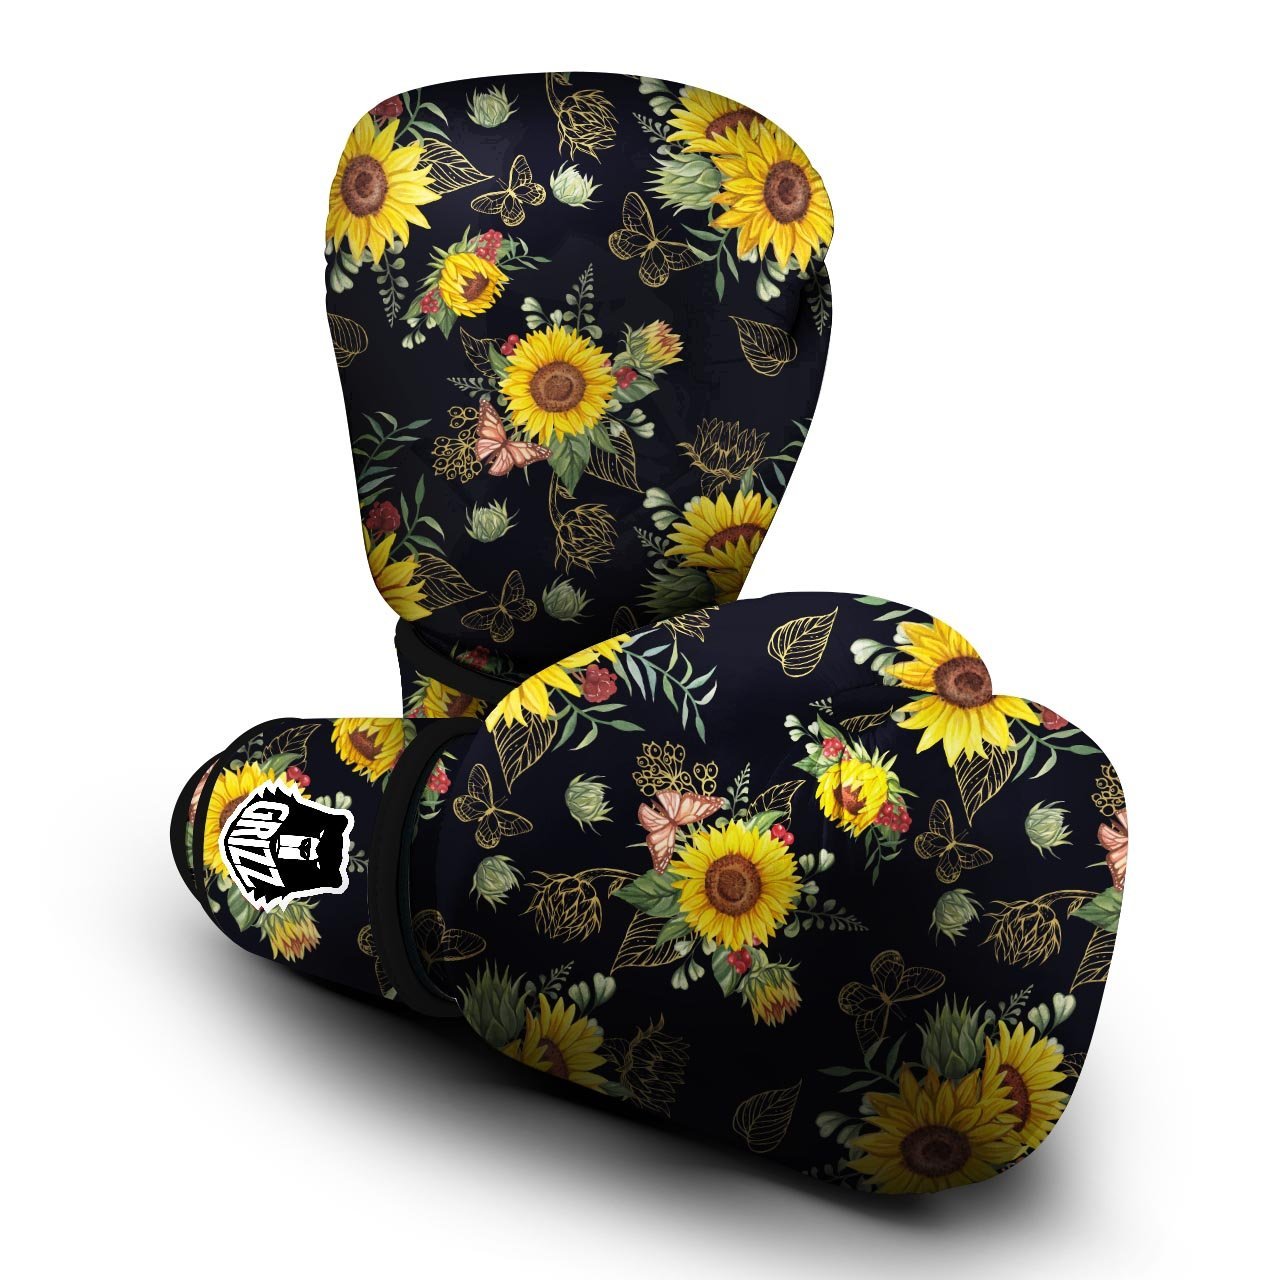 Sunflower Field Print Pattern Boxing Gloves-grizzshop